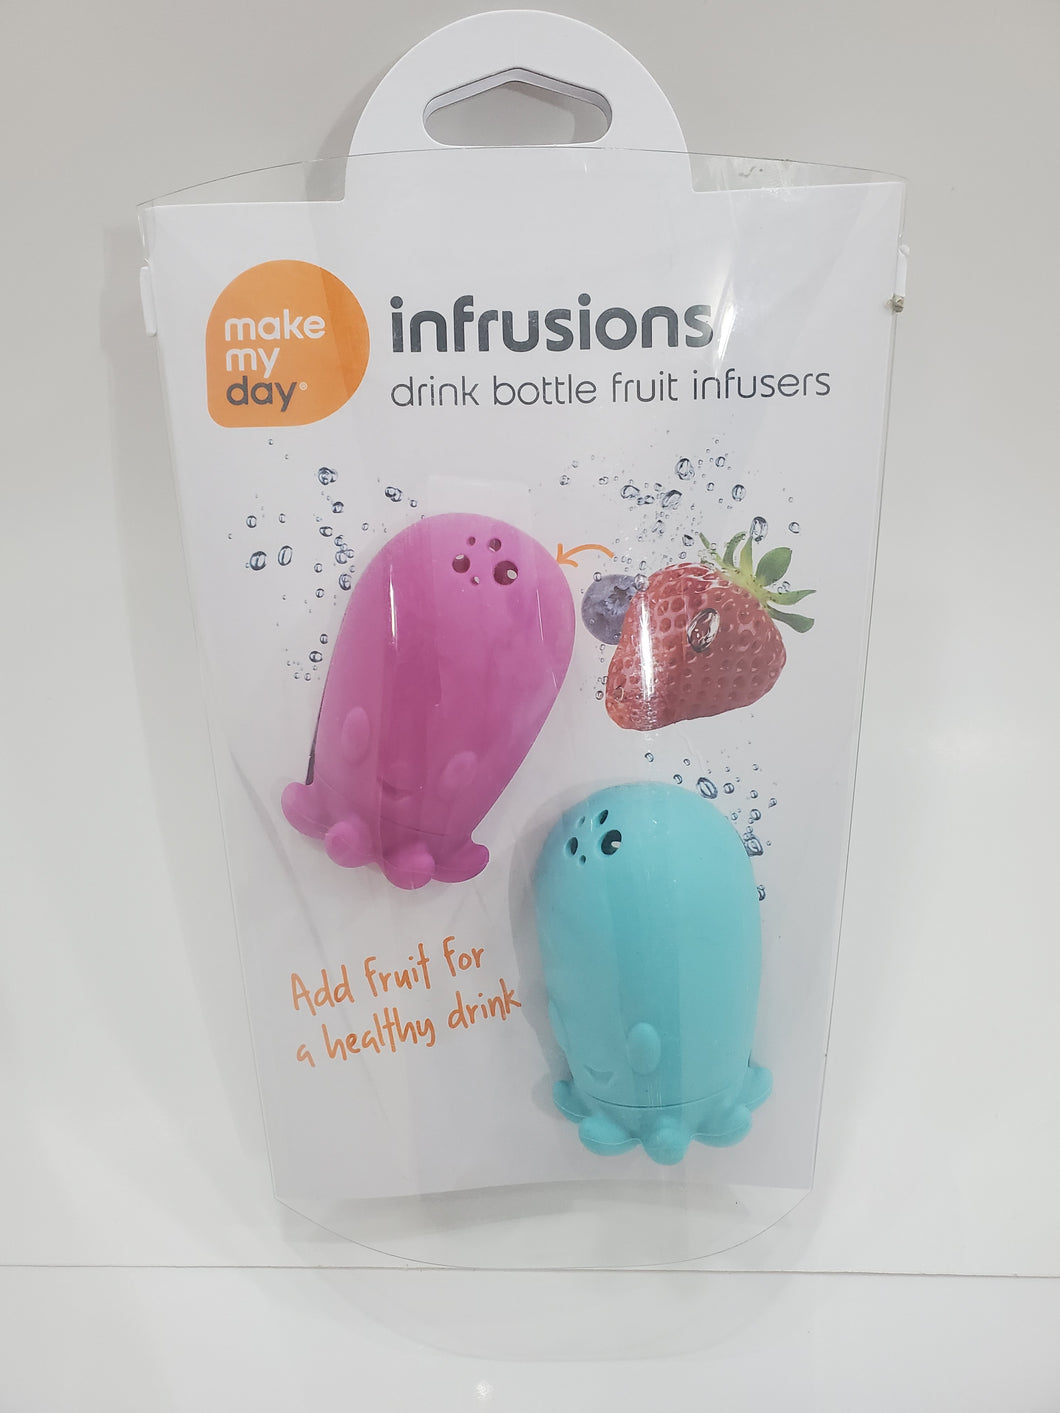 MAKE MY DAY 2 Piece Drink Bottle Infusions - 74590